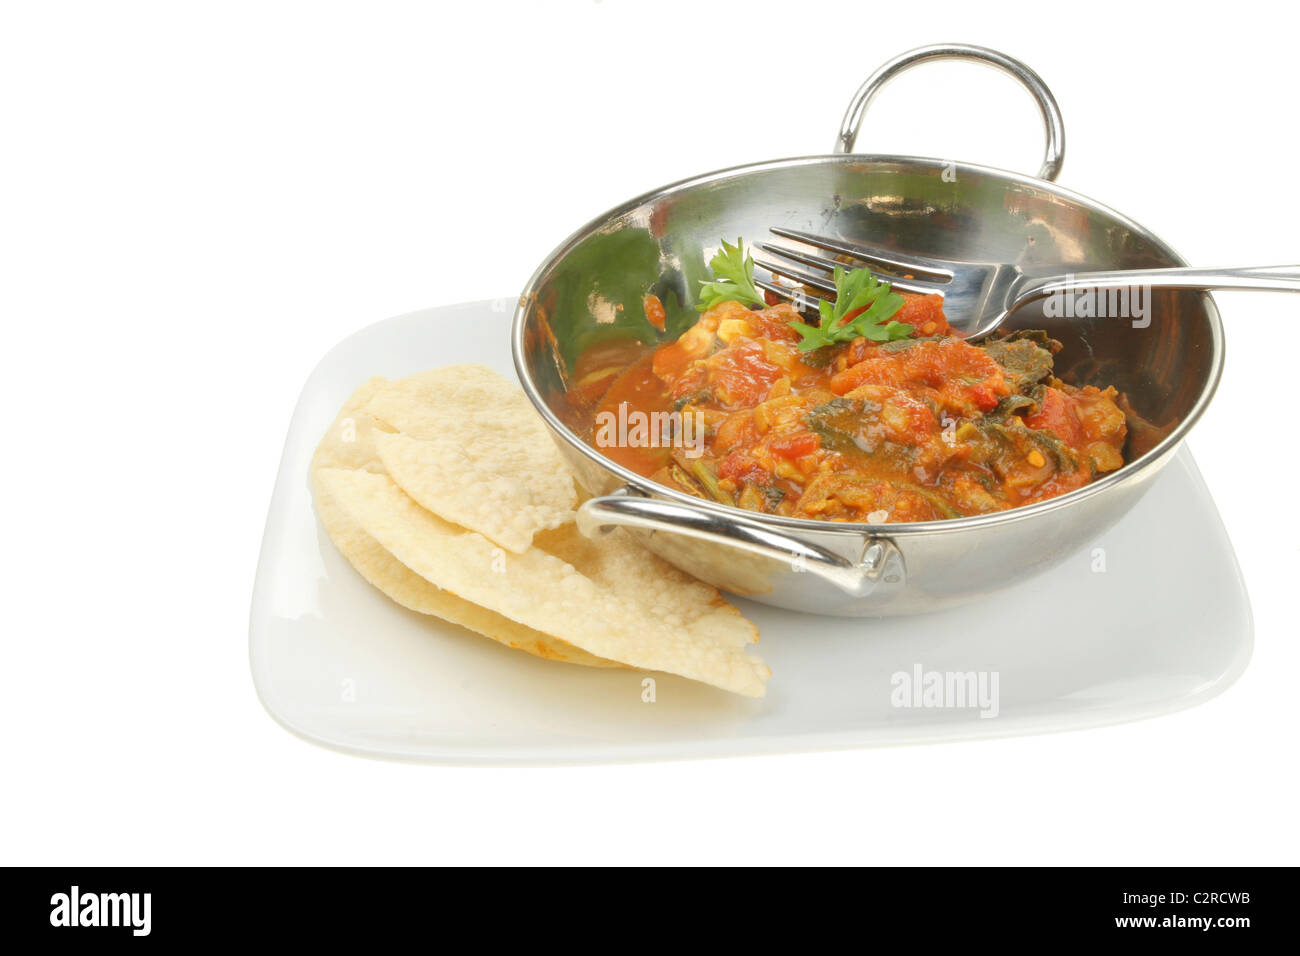 Indian Chicken Curry Balti Dish Stock Photo 204830887